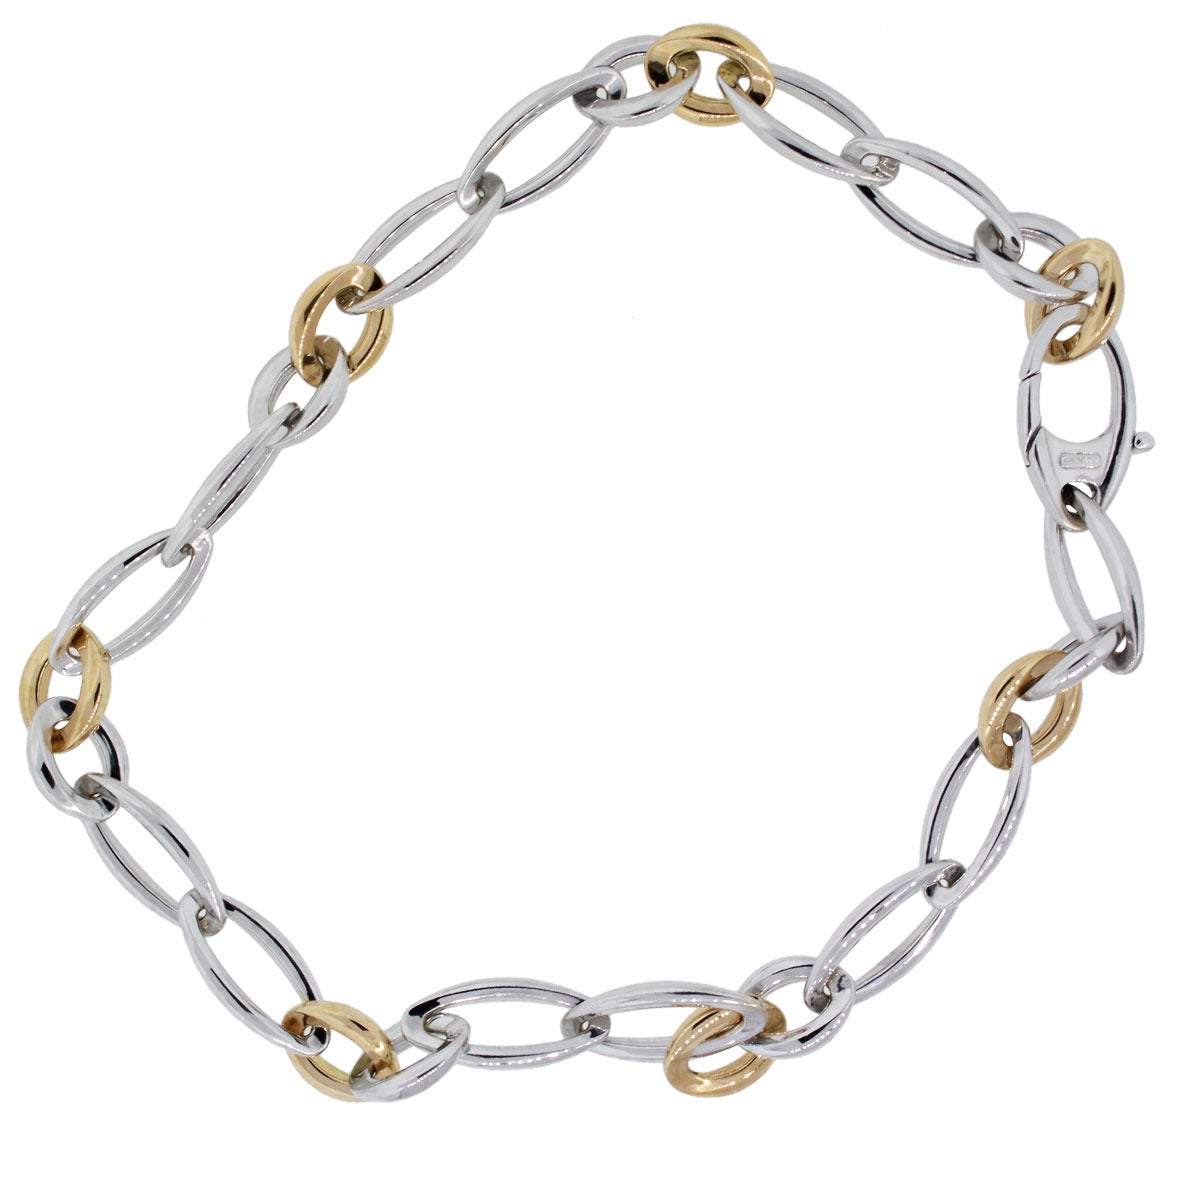 White and Rose Gold Chain Link Necklace by Chimento. This chain is 18k white gold and rose gold. The chain is 0.15